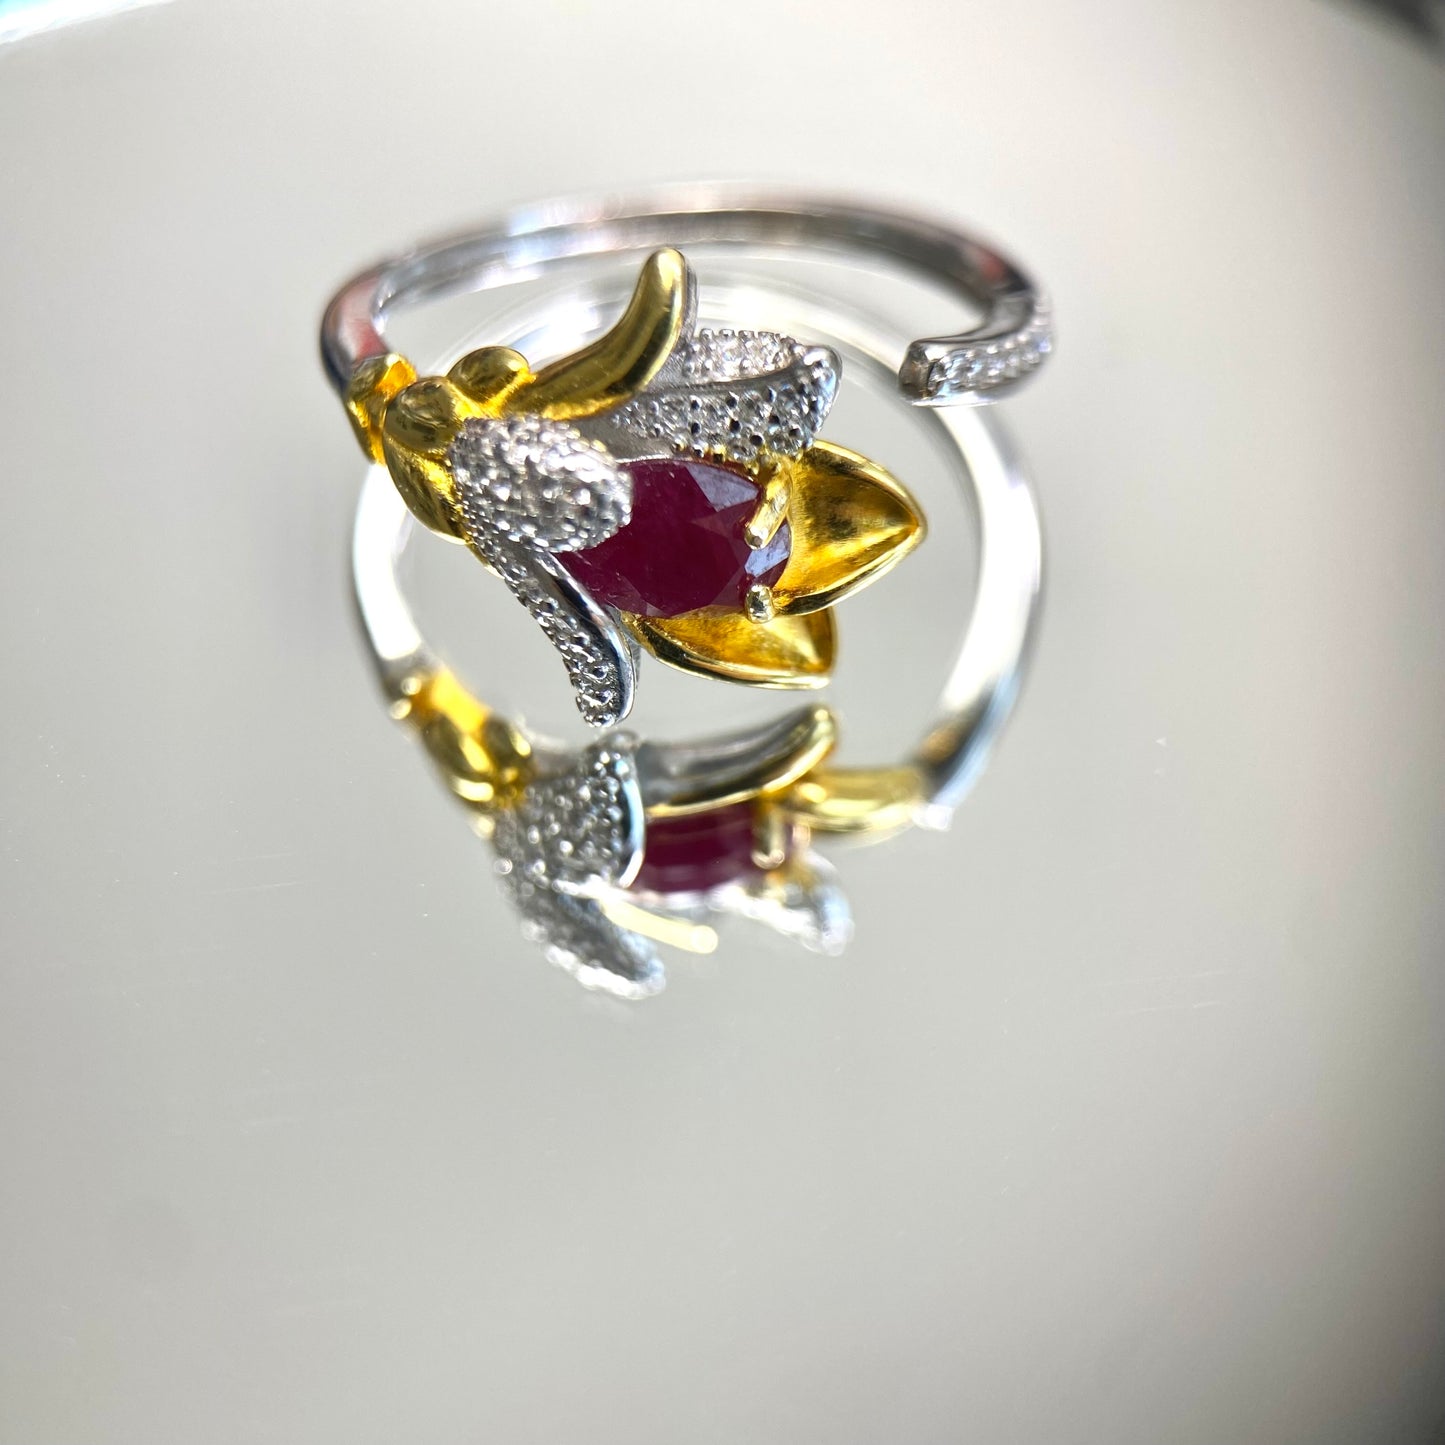 Ruby flowers ring